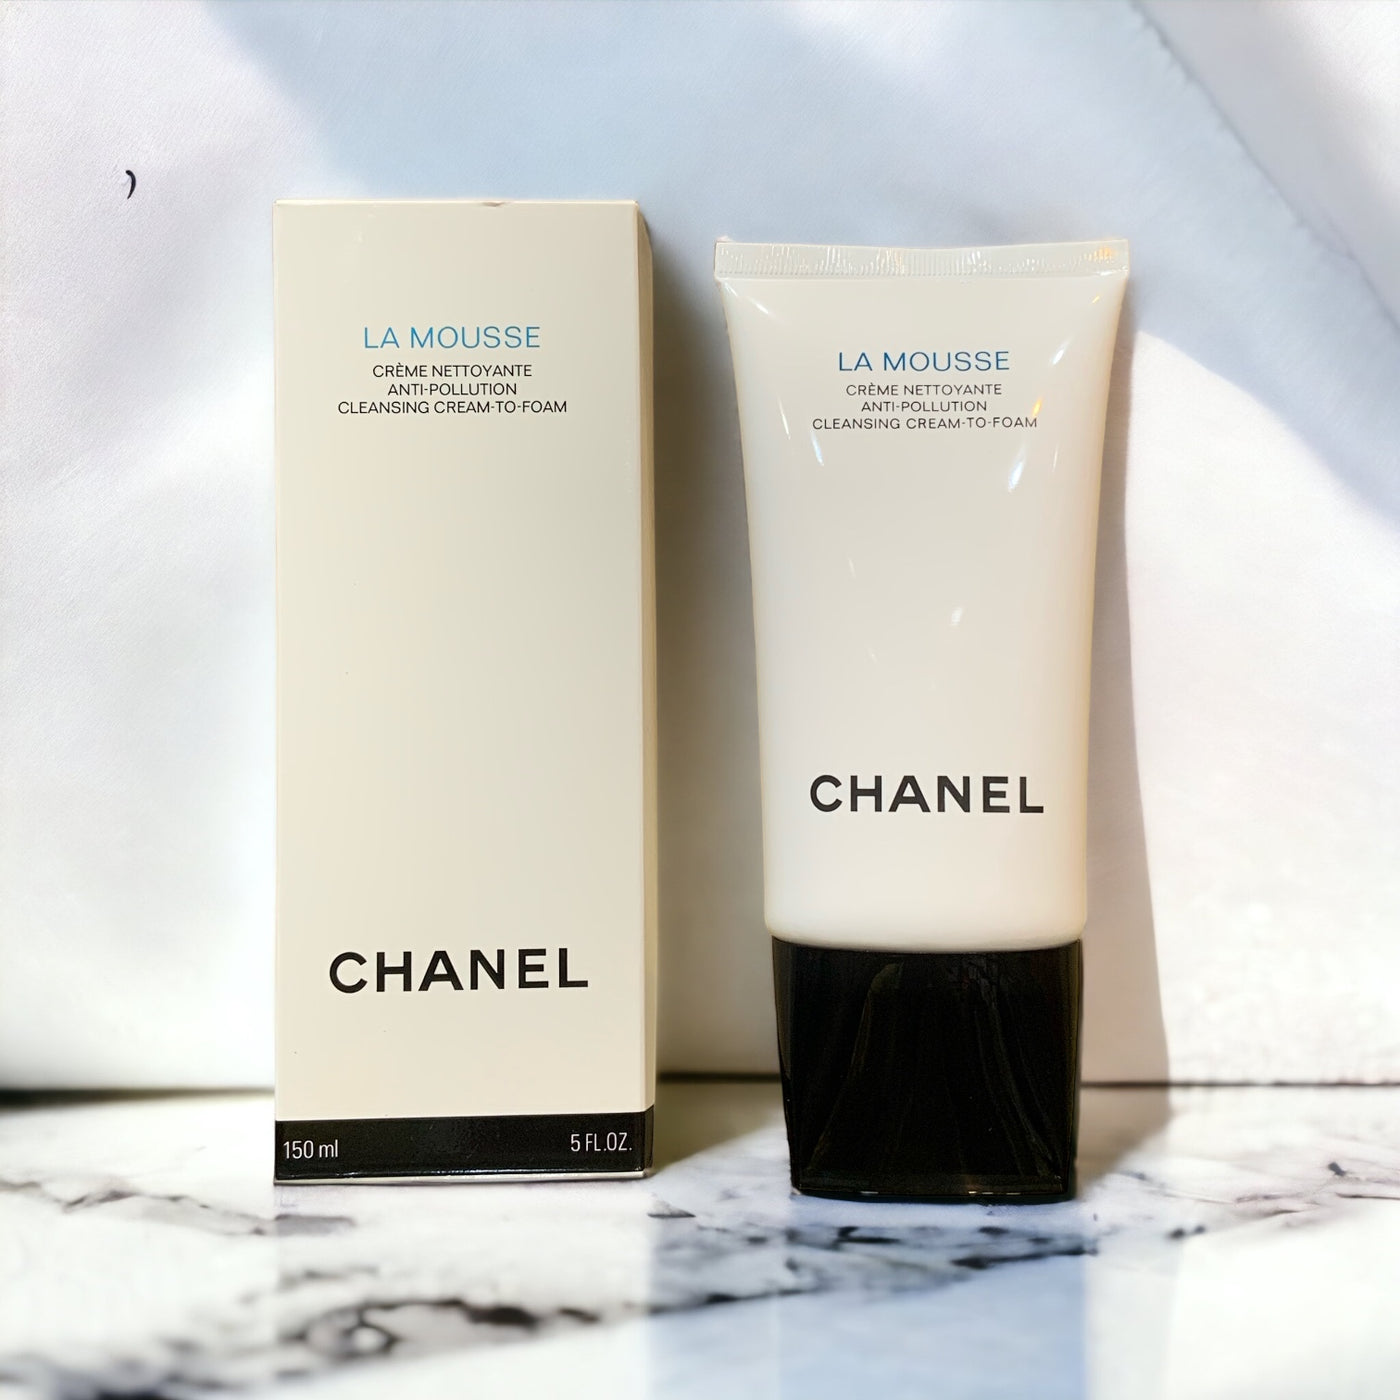 CHANEL LA MOUSSE cleansing cream-to-foam